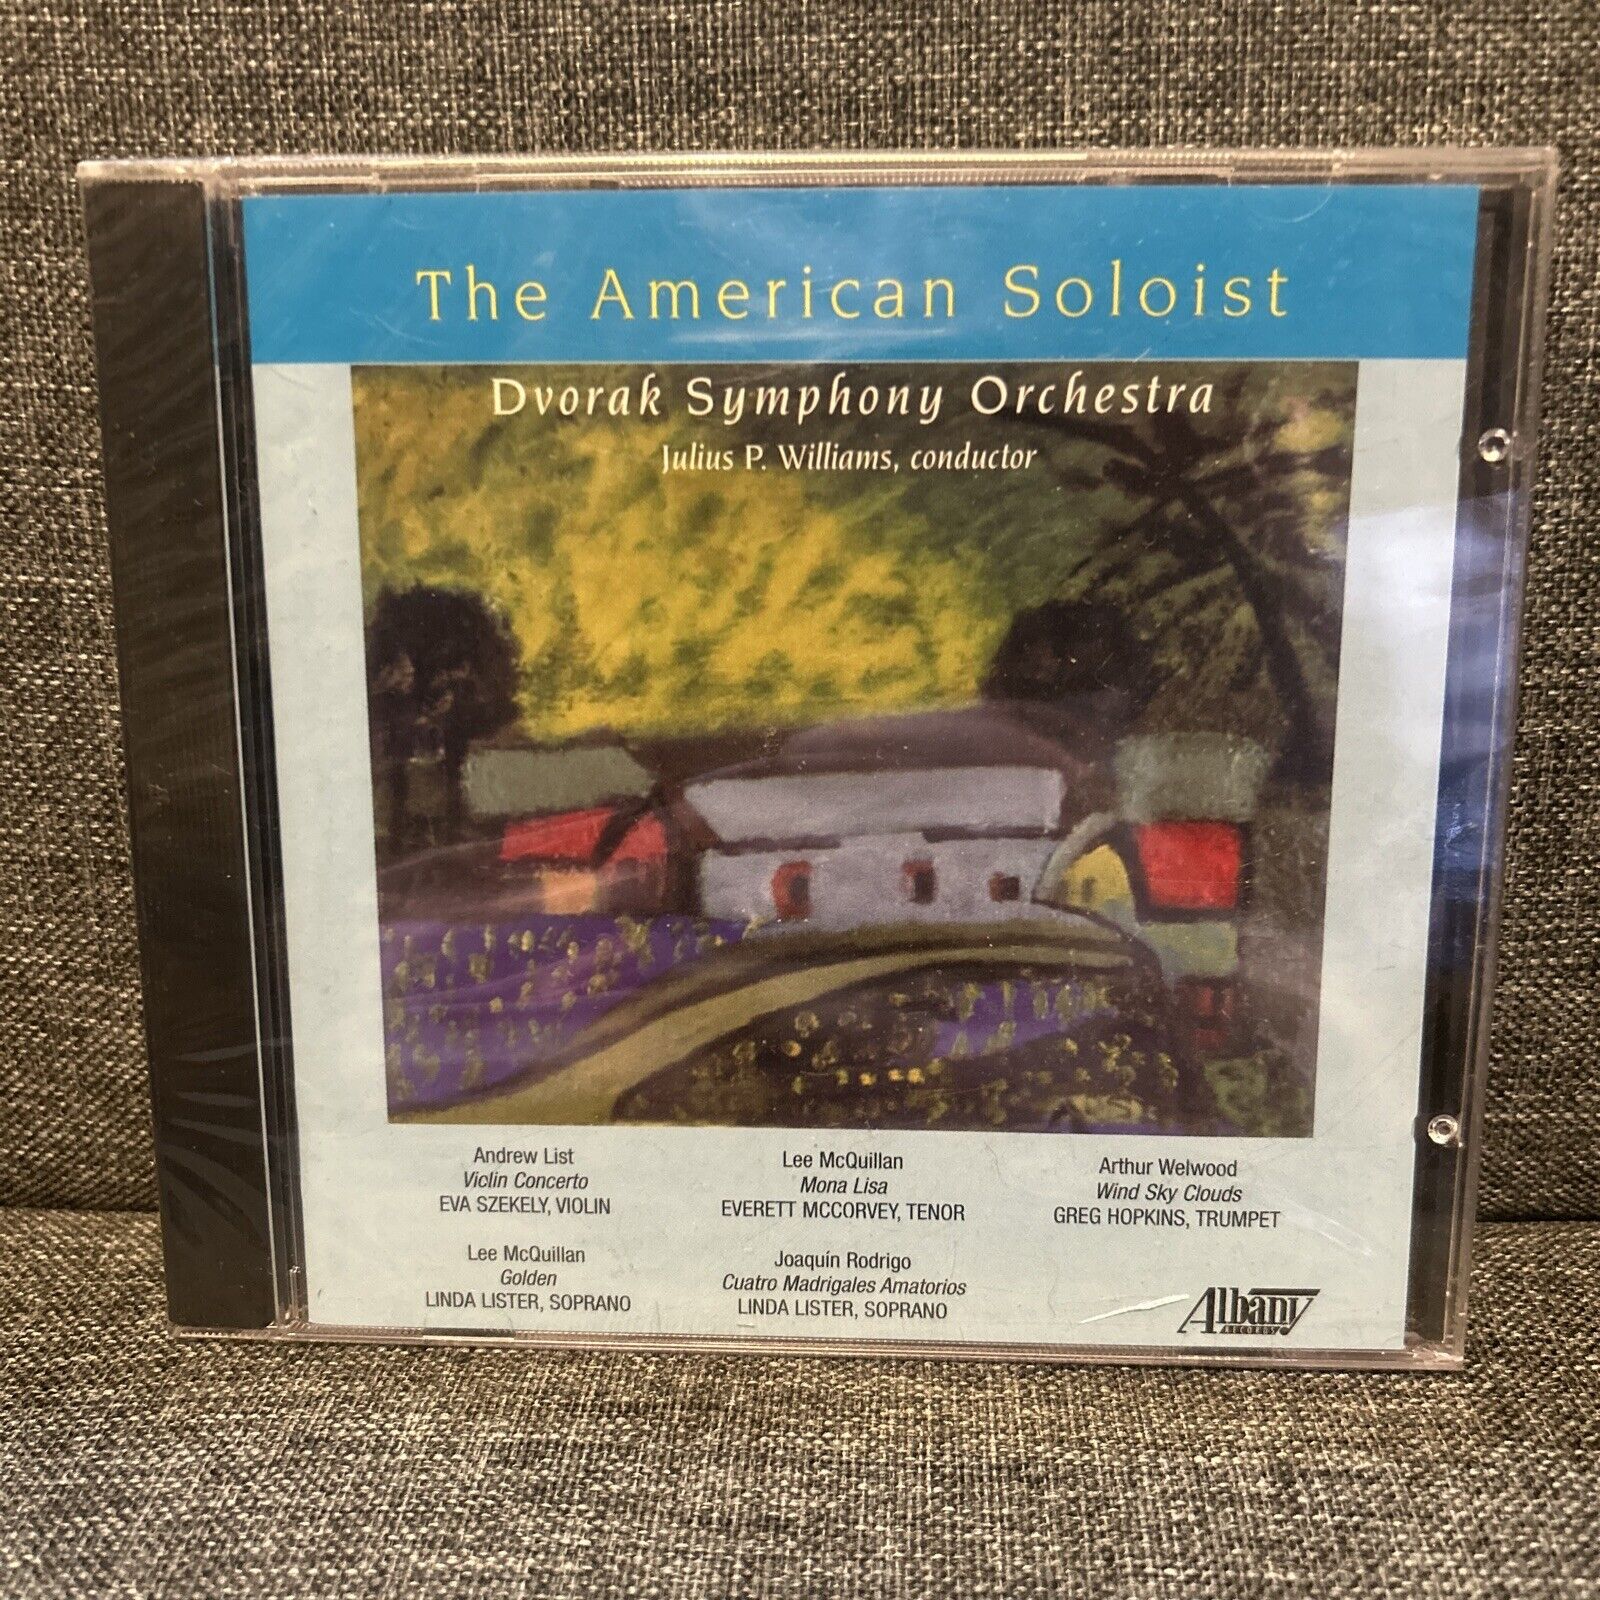 NEW & SEALED THE AMERICAN SOLOIST NEW CD Dvorak Symphony Orchestra Classical